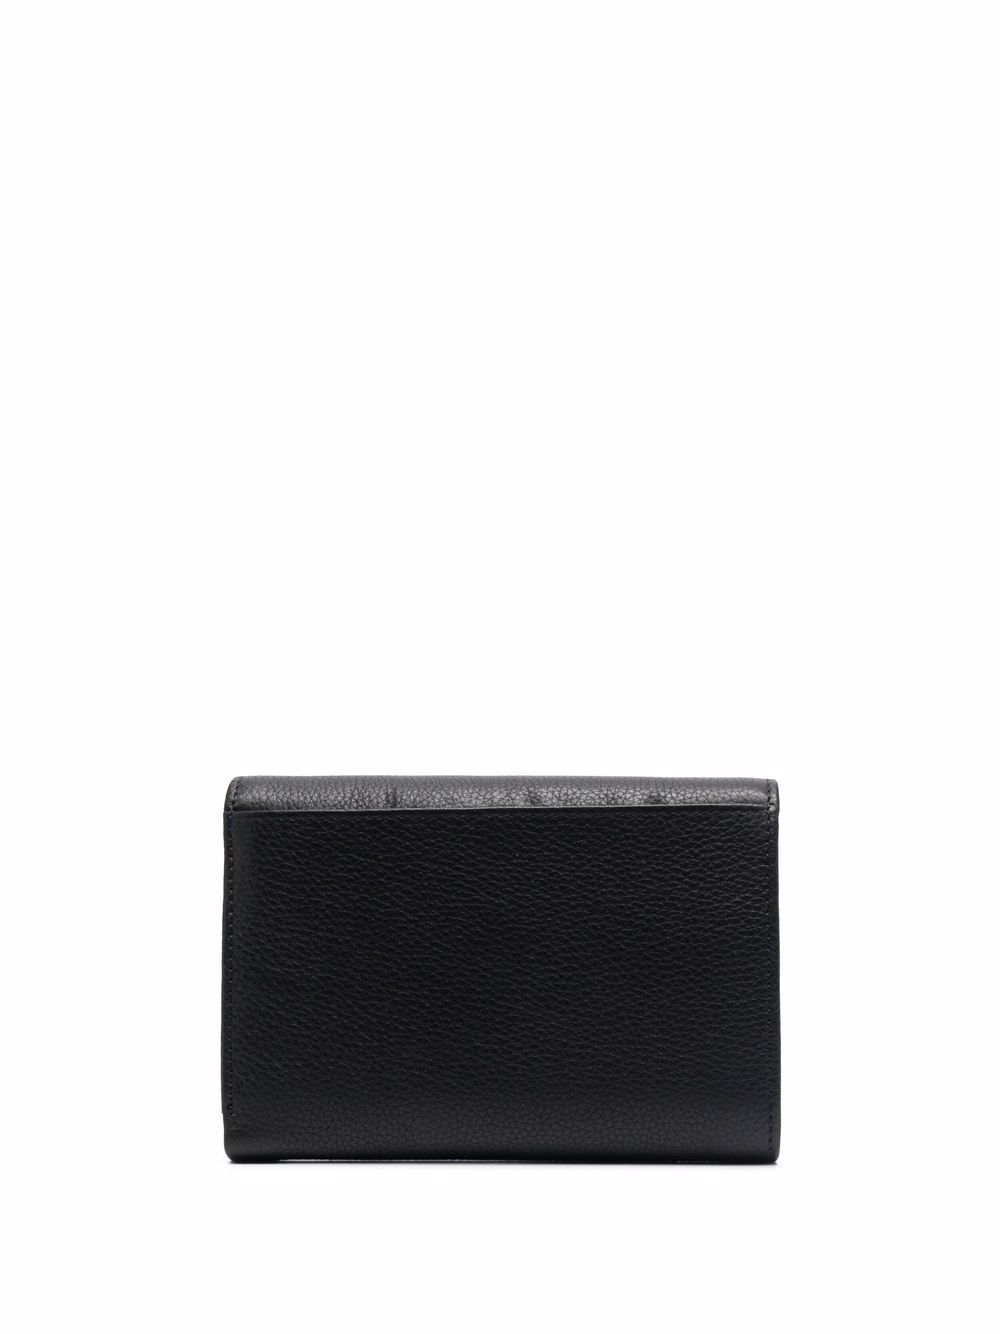 Shop Baldinini trifold leather wallet with Express Delivery - FARFETCH